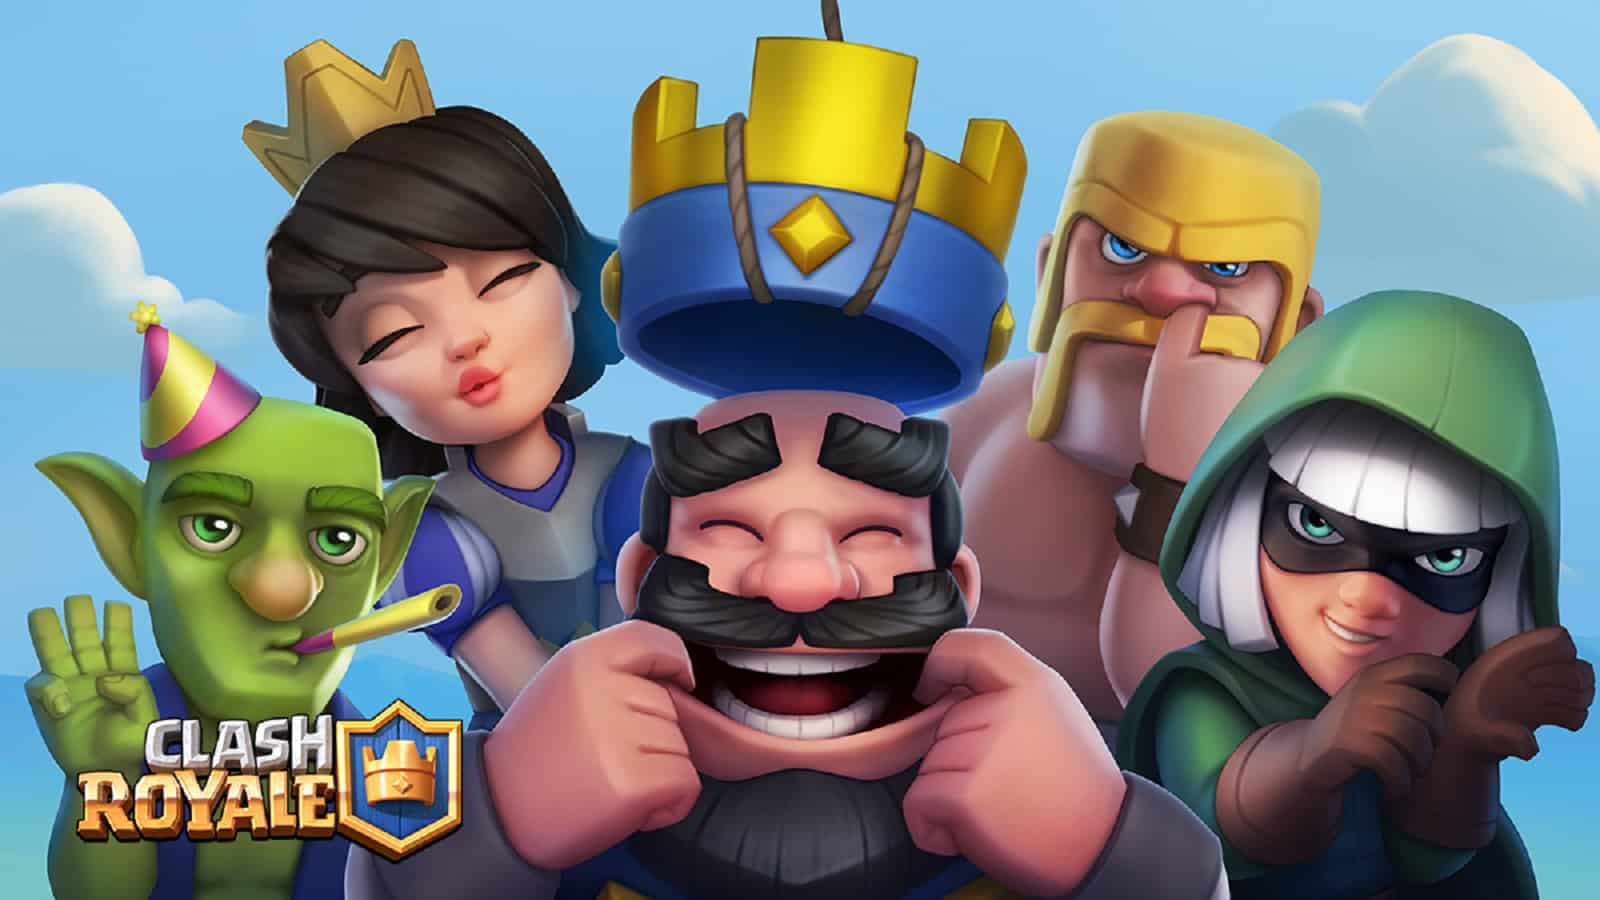 artwork for clash royale featuring several in-game characters.